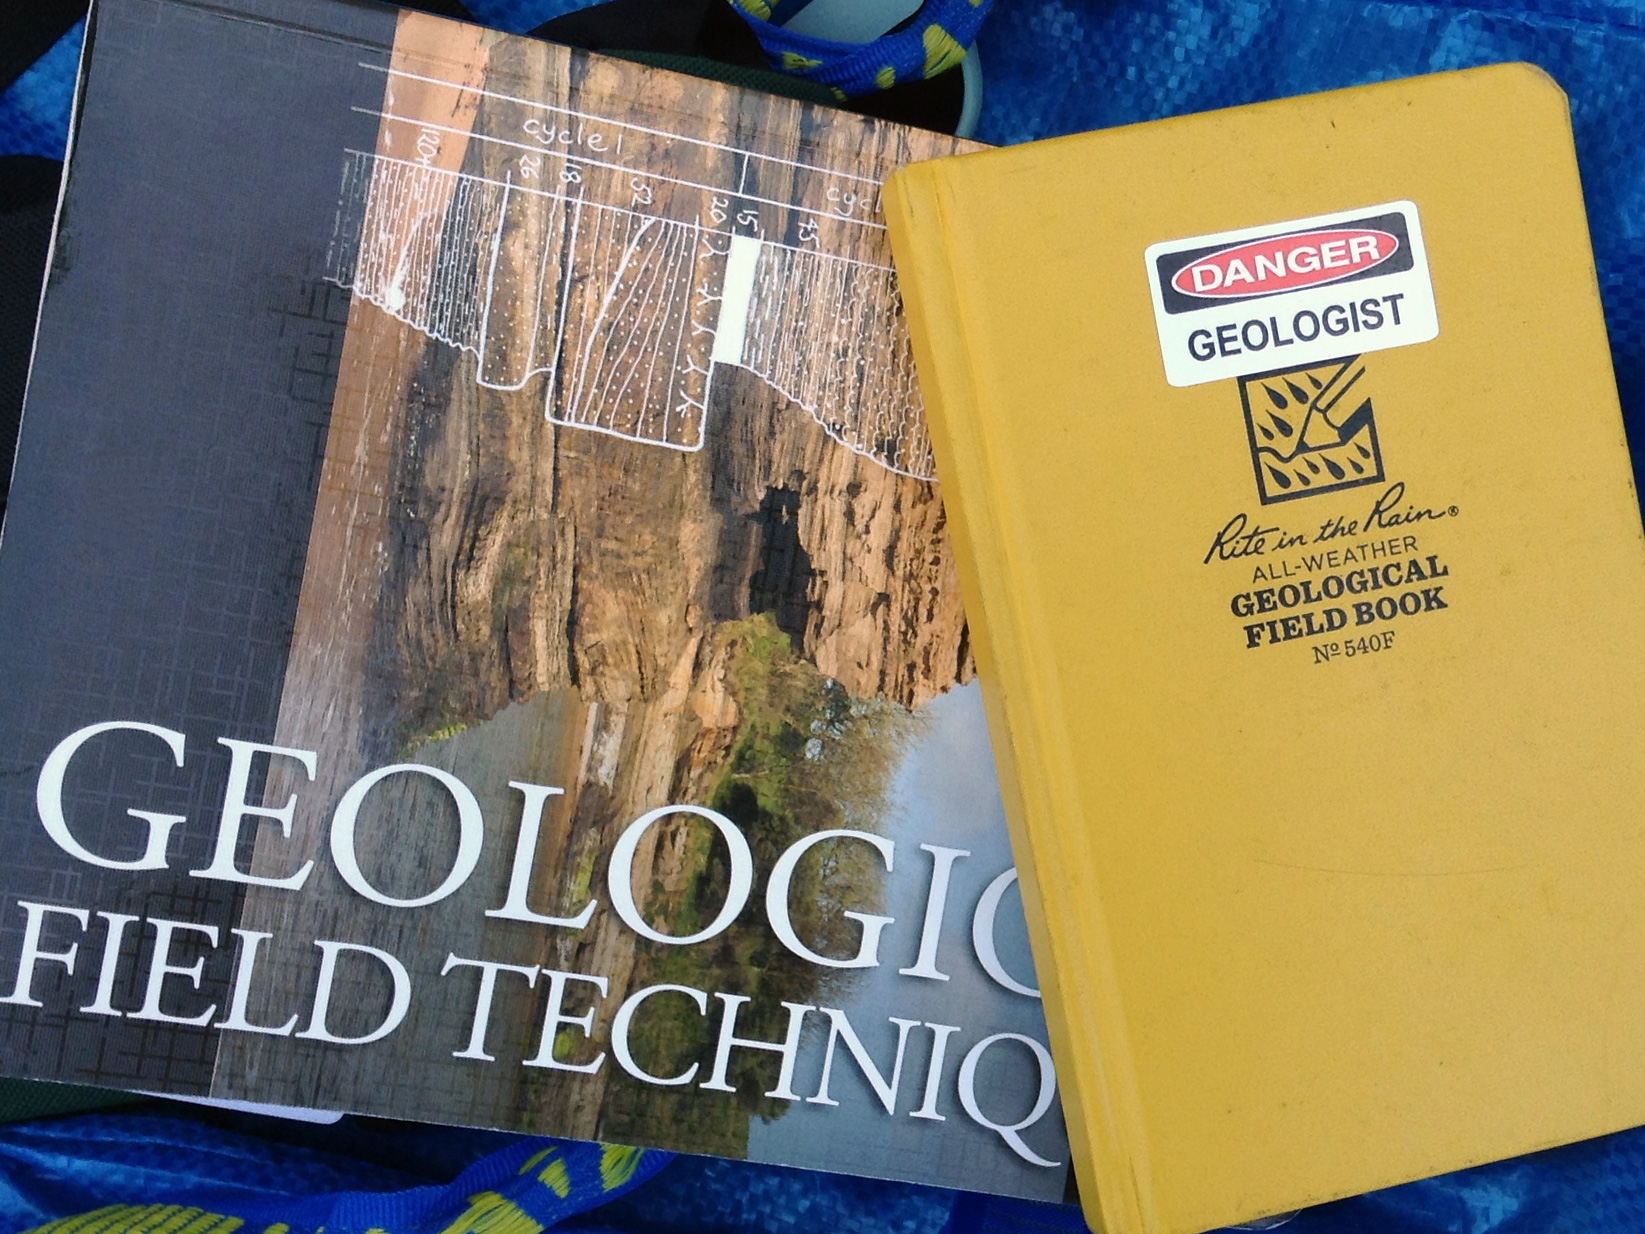 Fieldbook and geology textbook